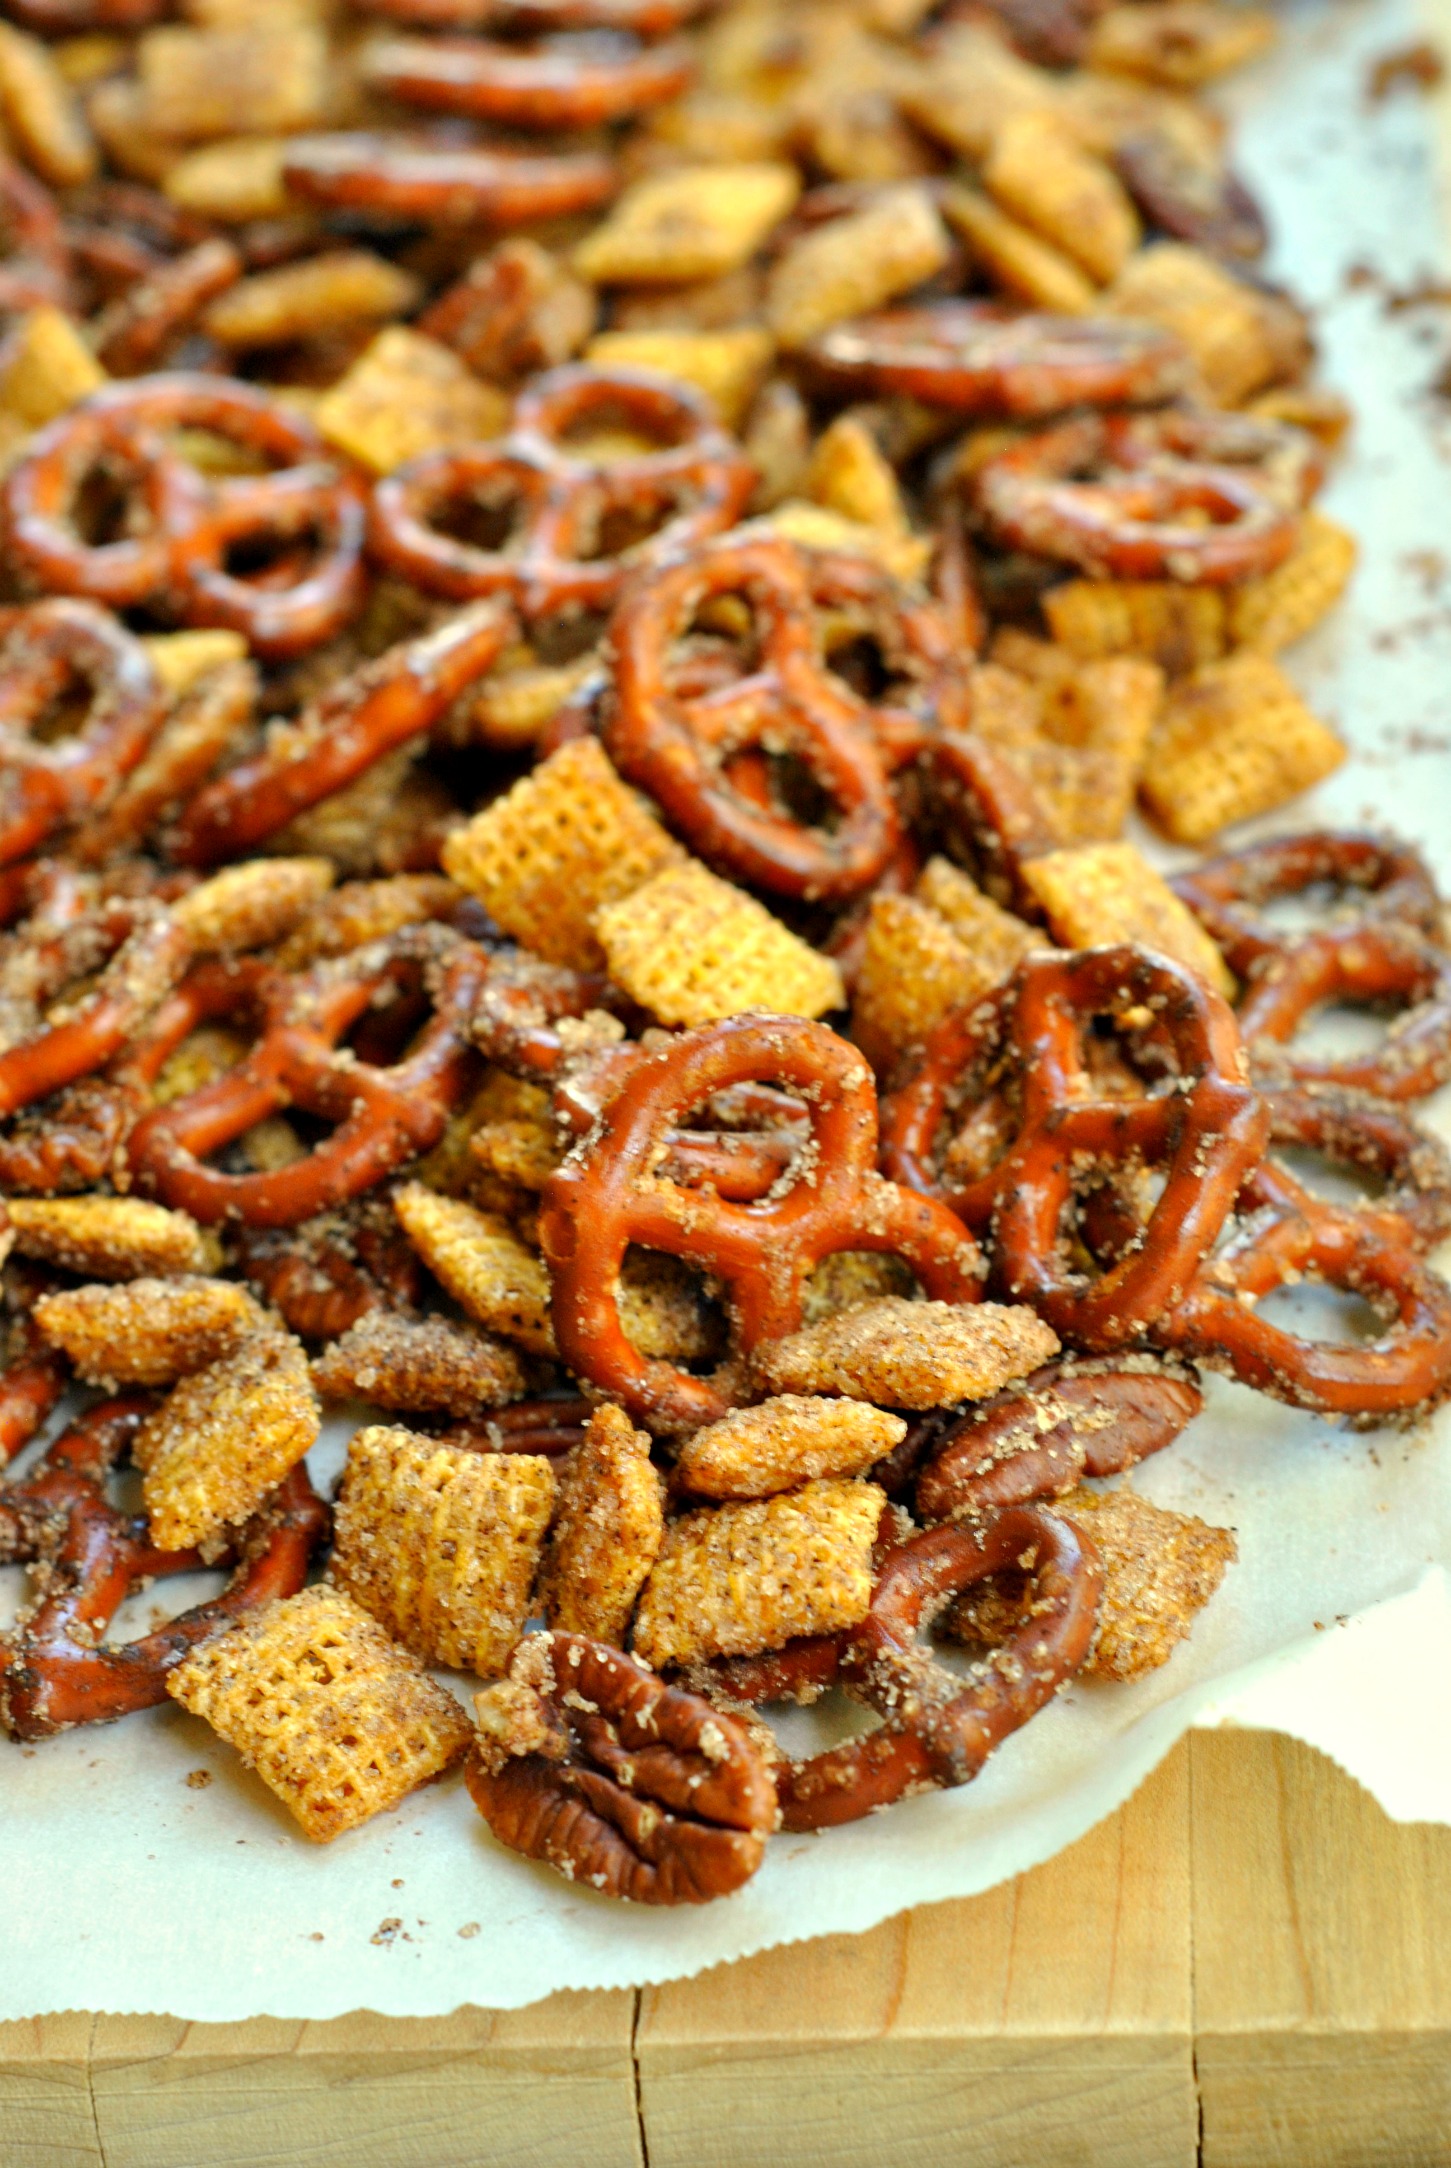 Cinnamon Sugar Snack Mix Recipe is perfect for satisfying your snack time cravings! Pretzels, pecans, candy, and cereal coated in cinnamon sugar make this mix so indulgent!